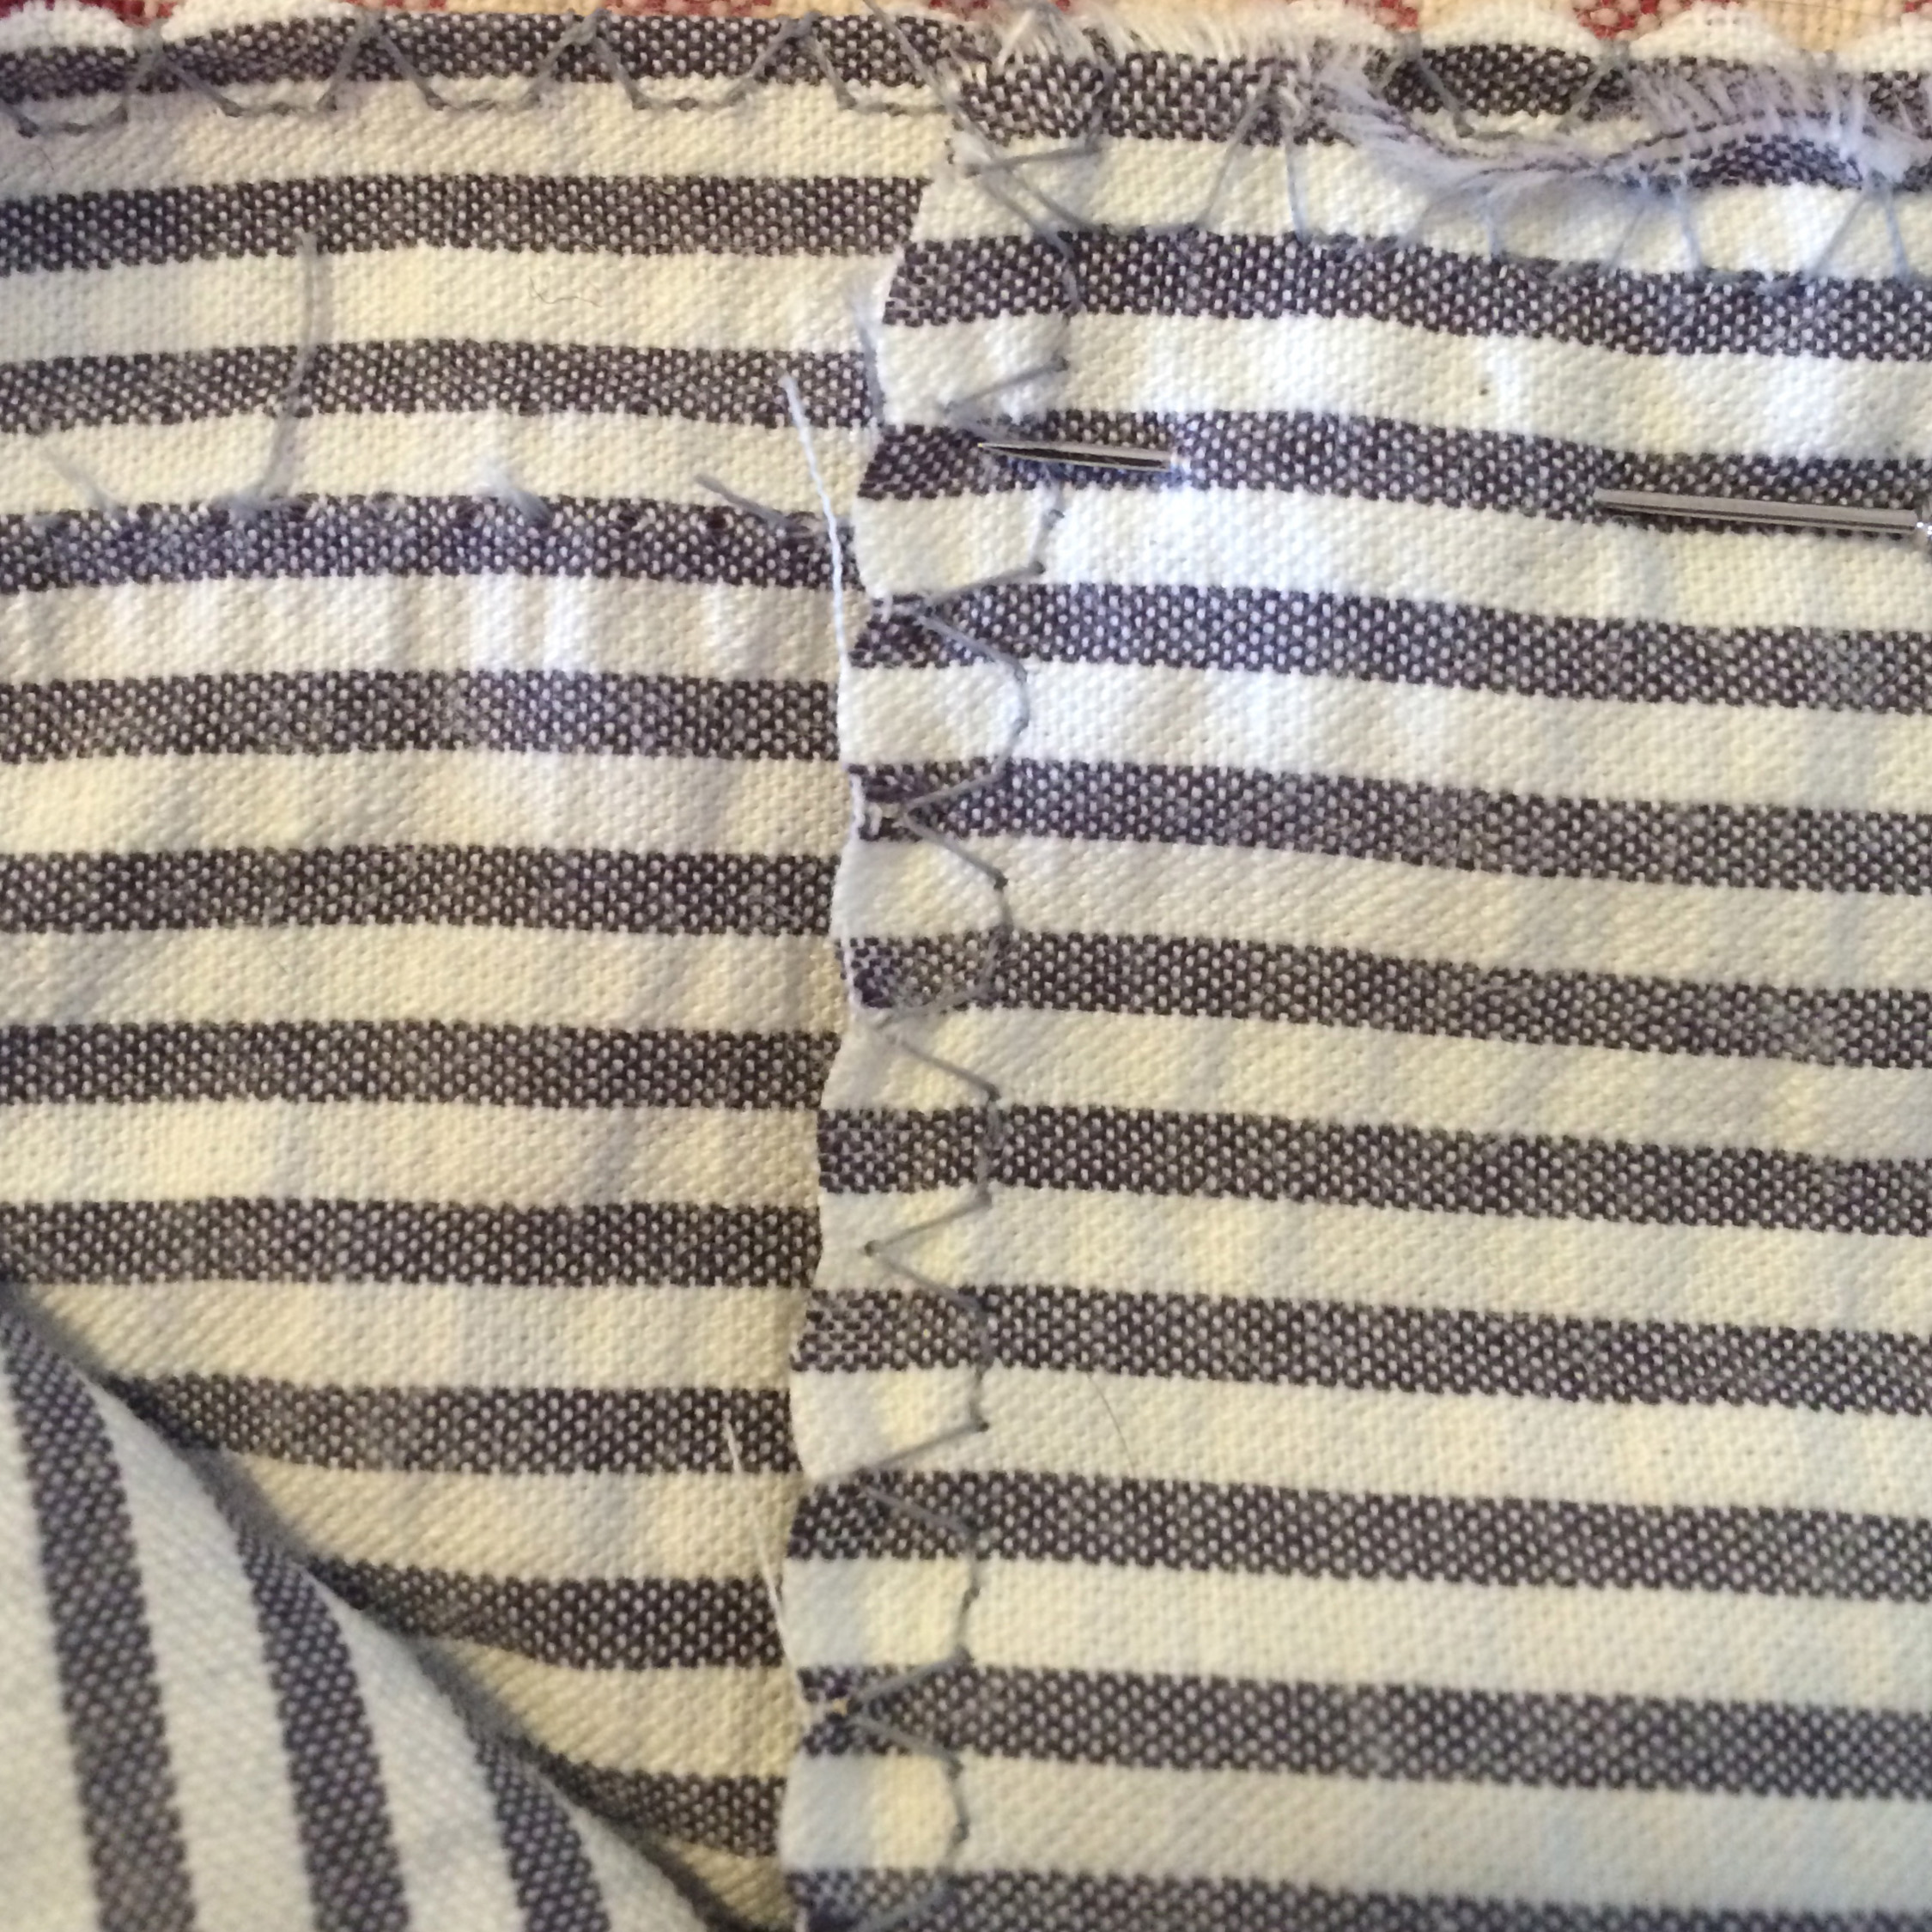 6 tips for sewing with stripes | The Self Made Wardrobe